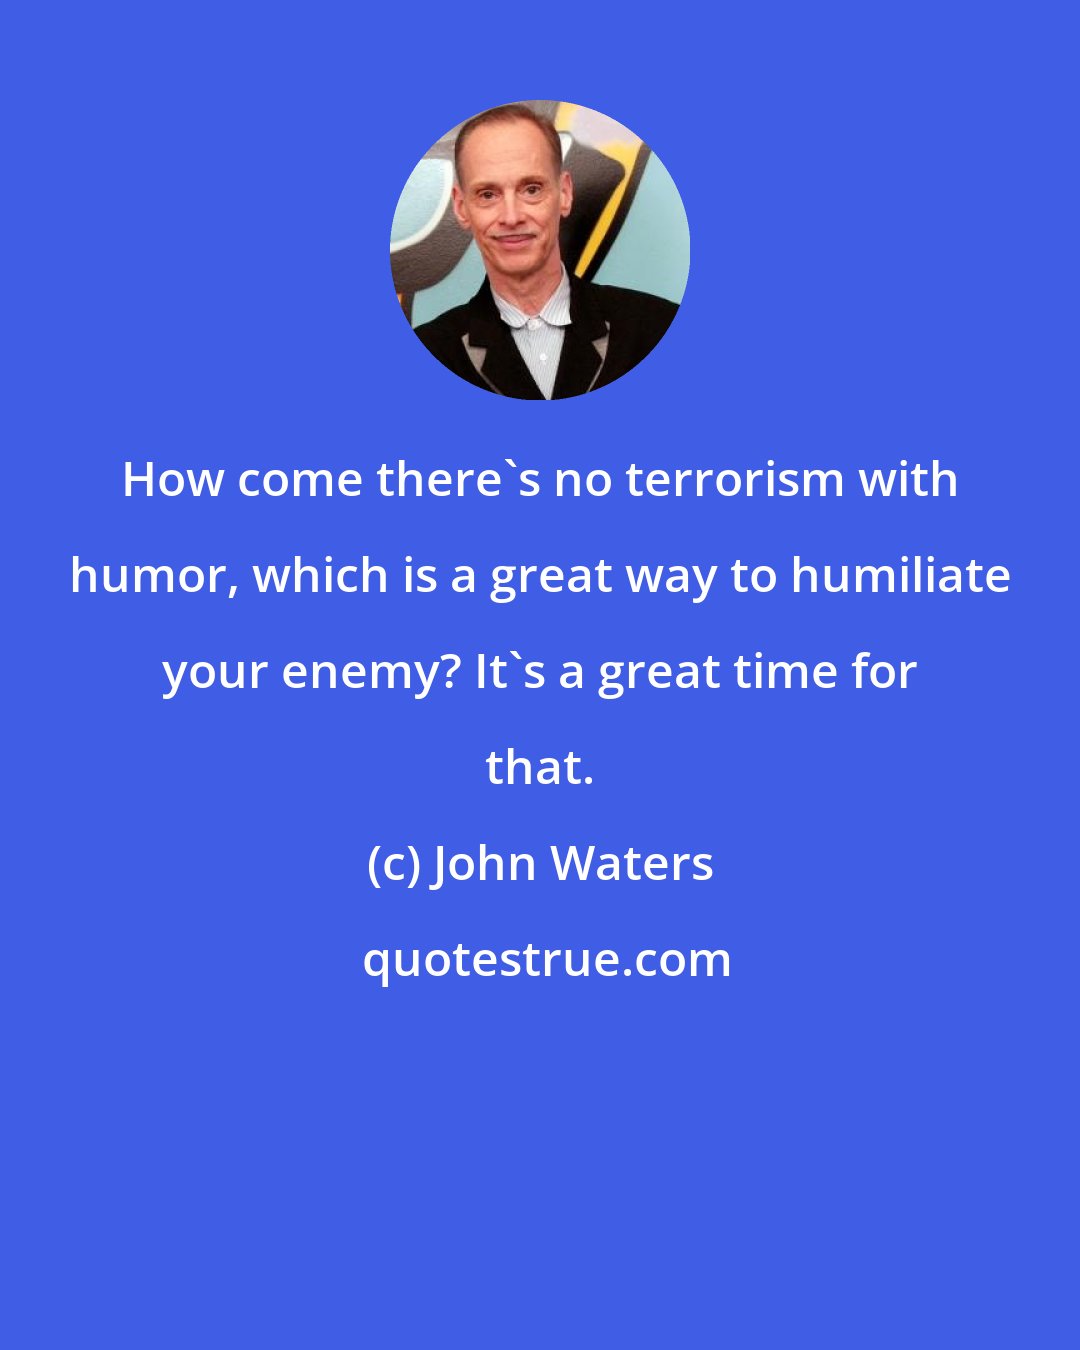 John Waters: How come there's no terrorism with humor, which is a great way to humiliate your enemy? It's a great time for that.